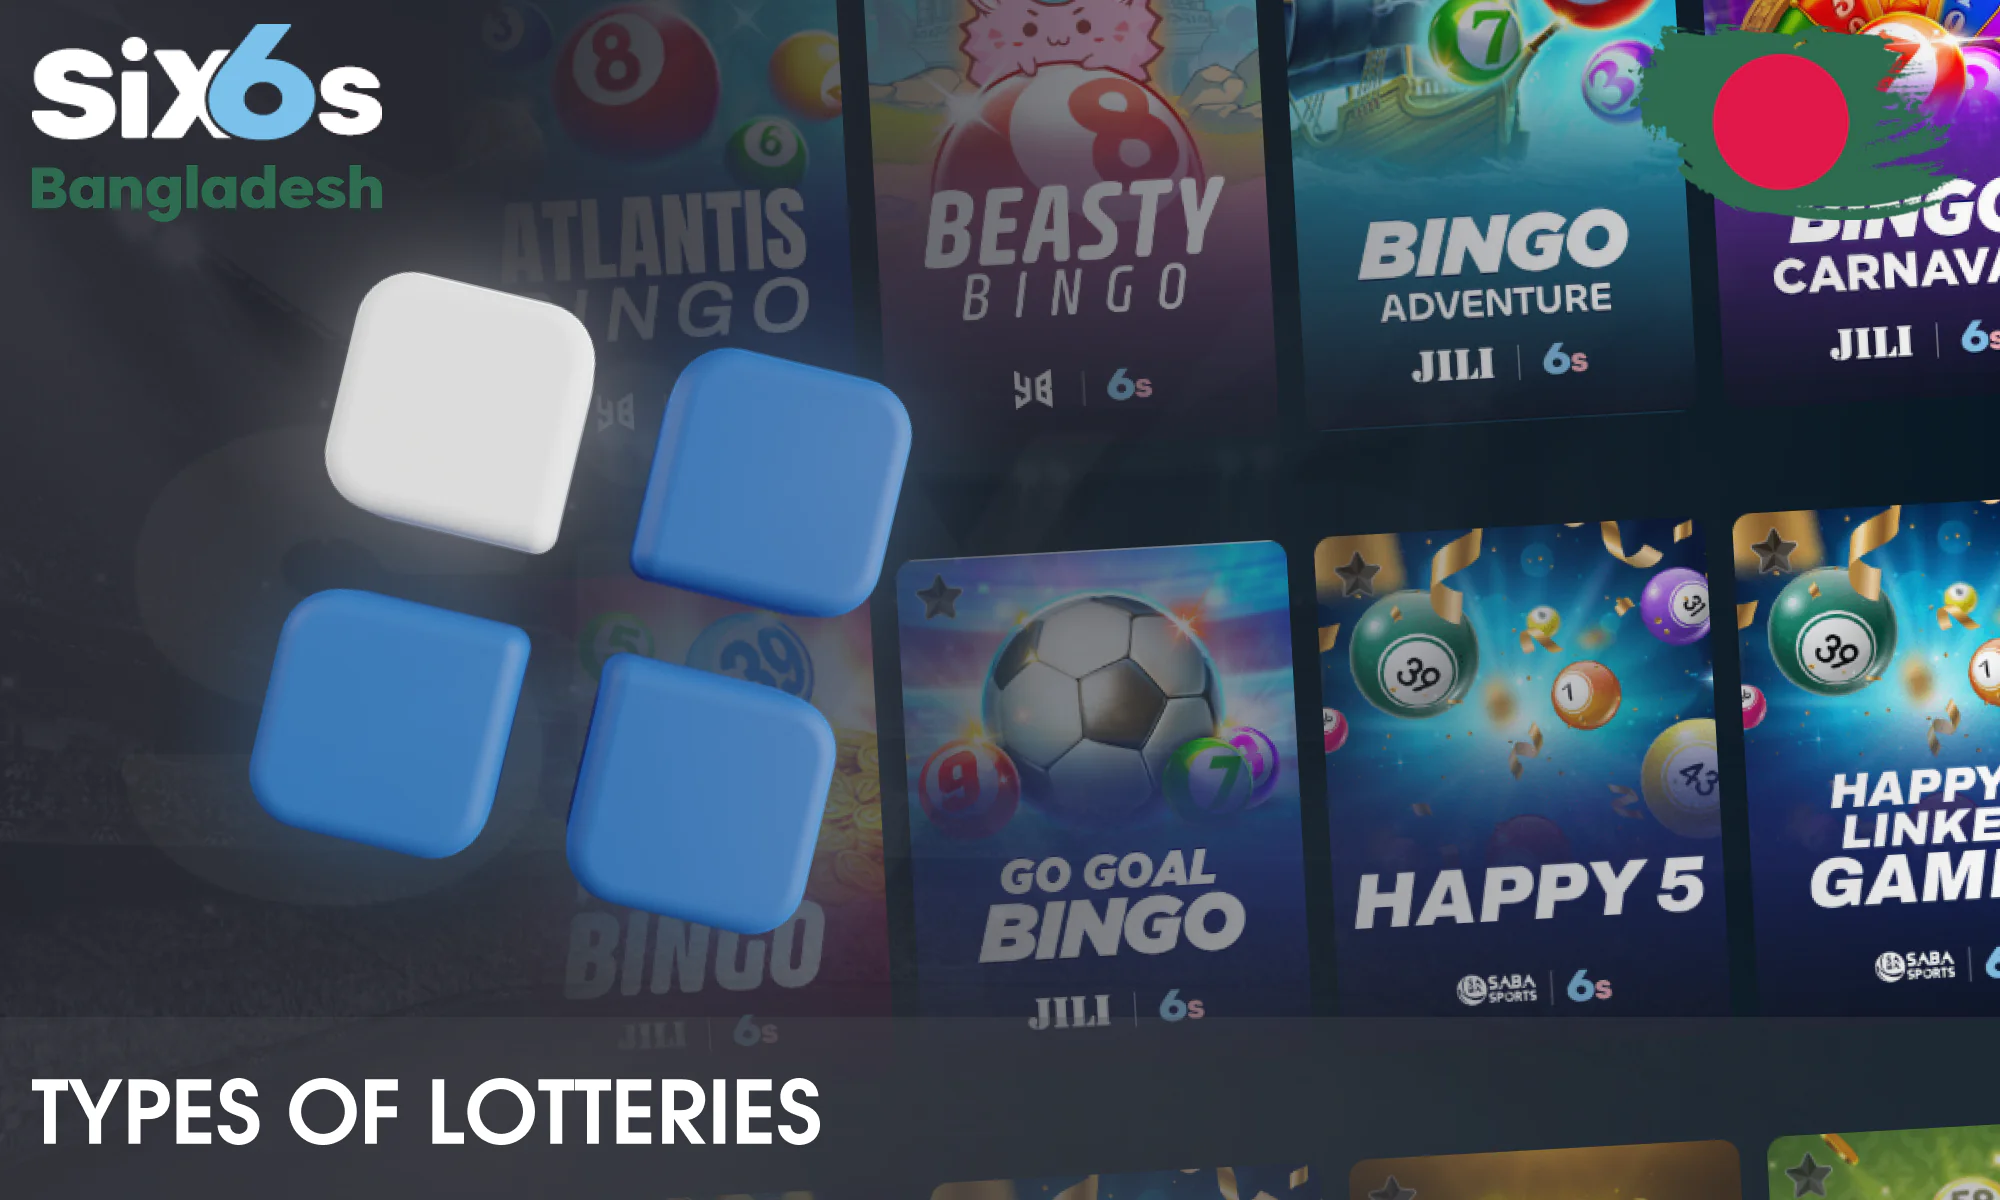 Six6s Casino offers variety of popular lottery types